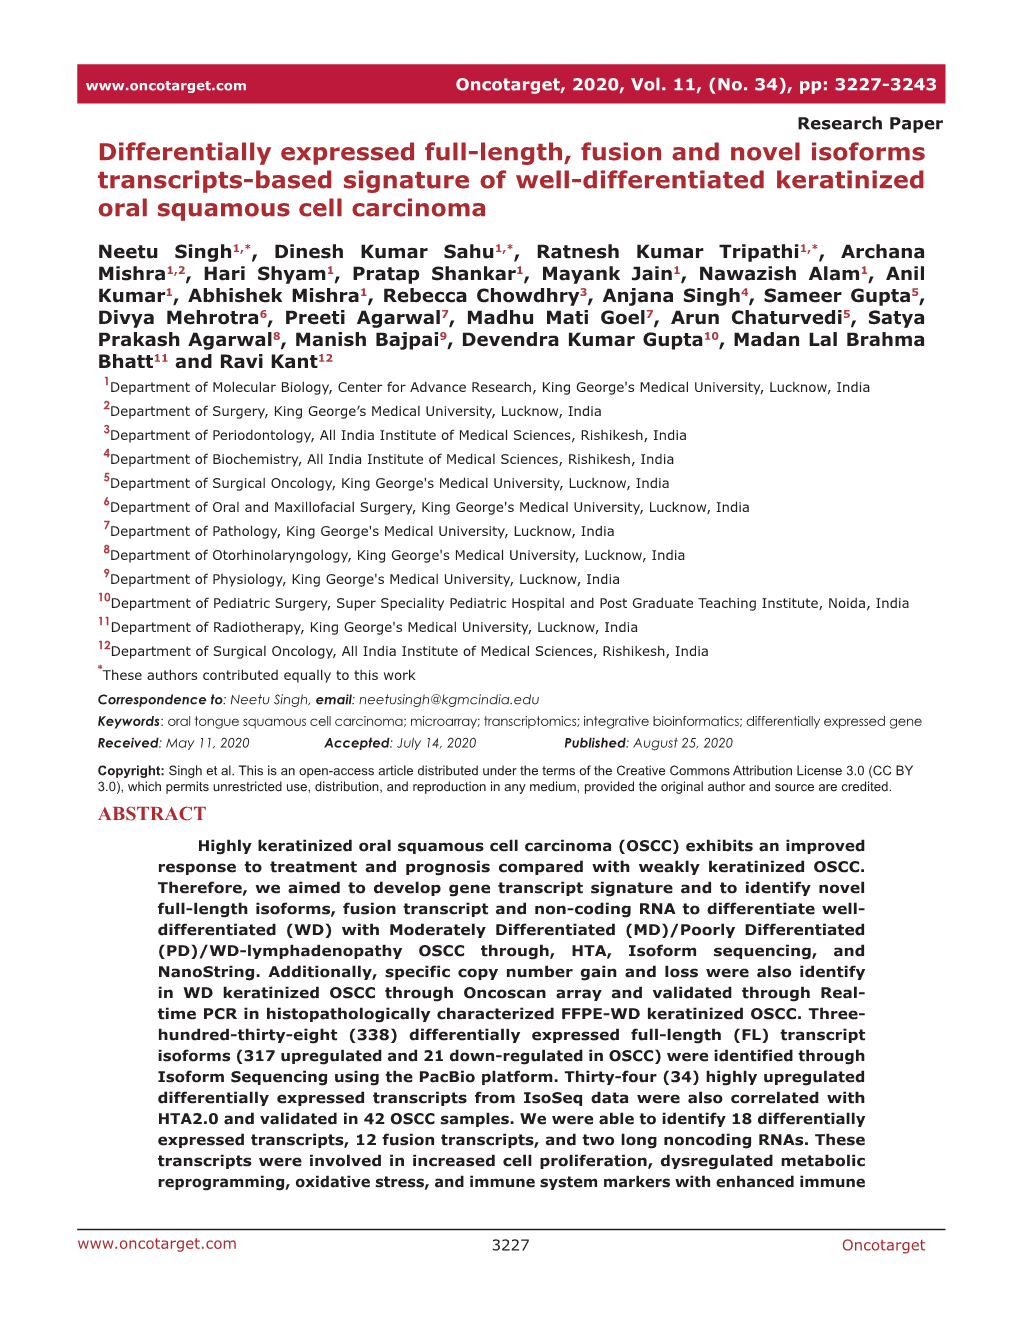 Differentially Expressed Full-Length, Fusion and Novel Isoforms Transcripts-Based Signature of Well-Differentiated Keratinized Oral Squamous Cell Carcinoma